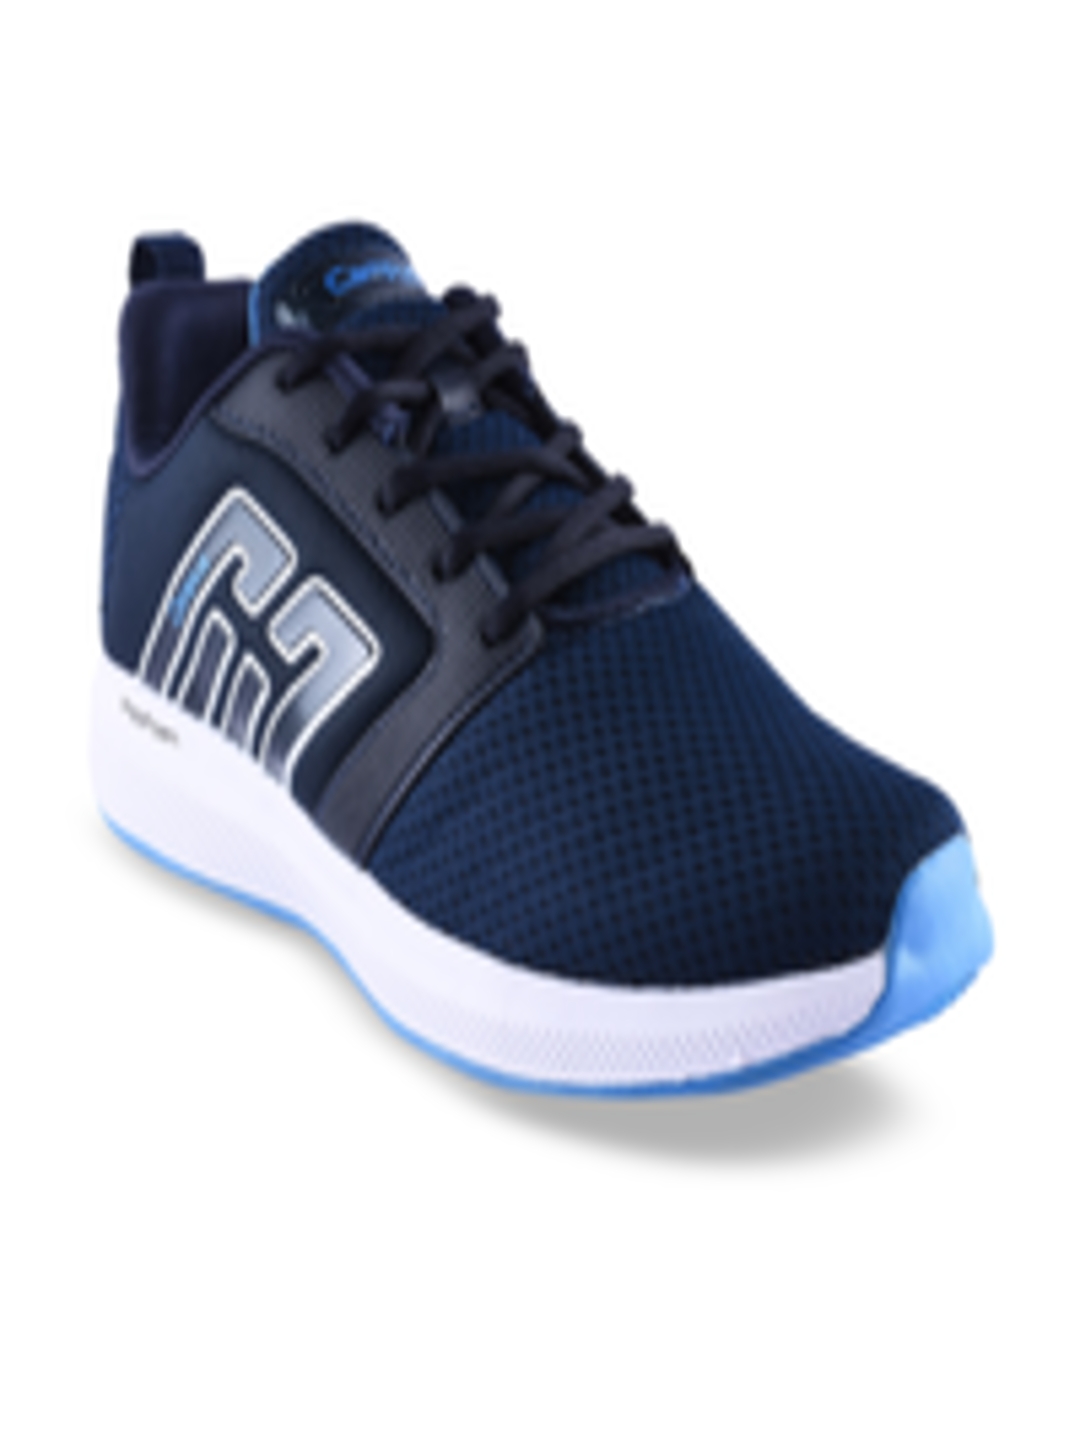 Buy Campus Men Navy Blue Running Shoes - Sports Shoes for Men 9257521 ...